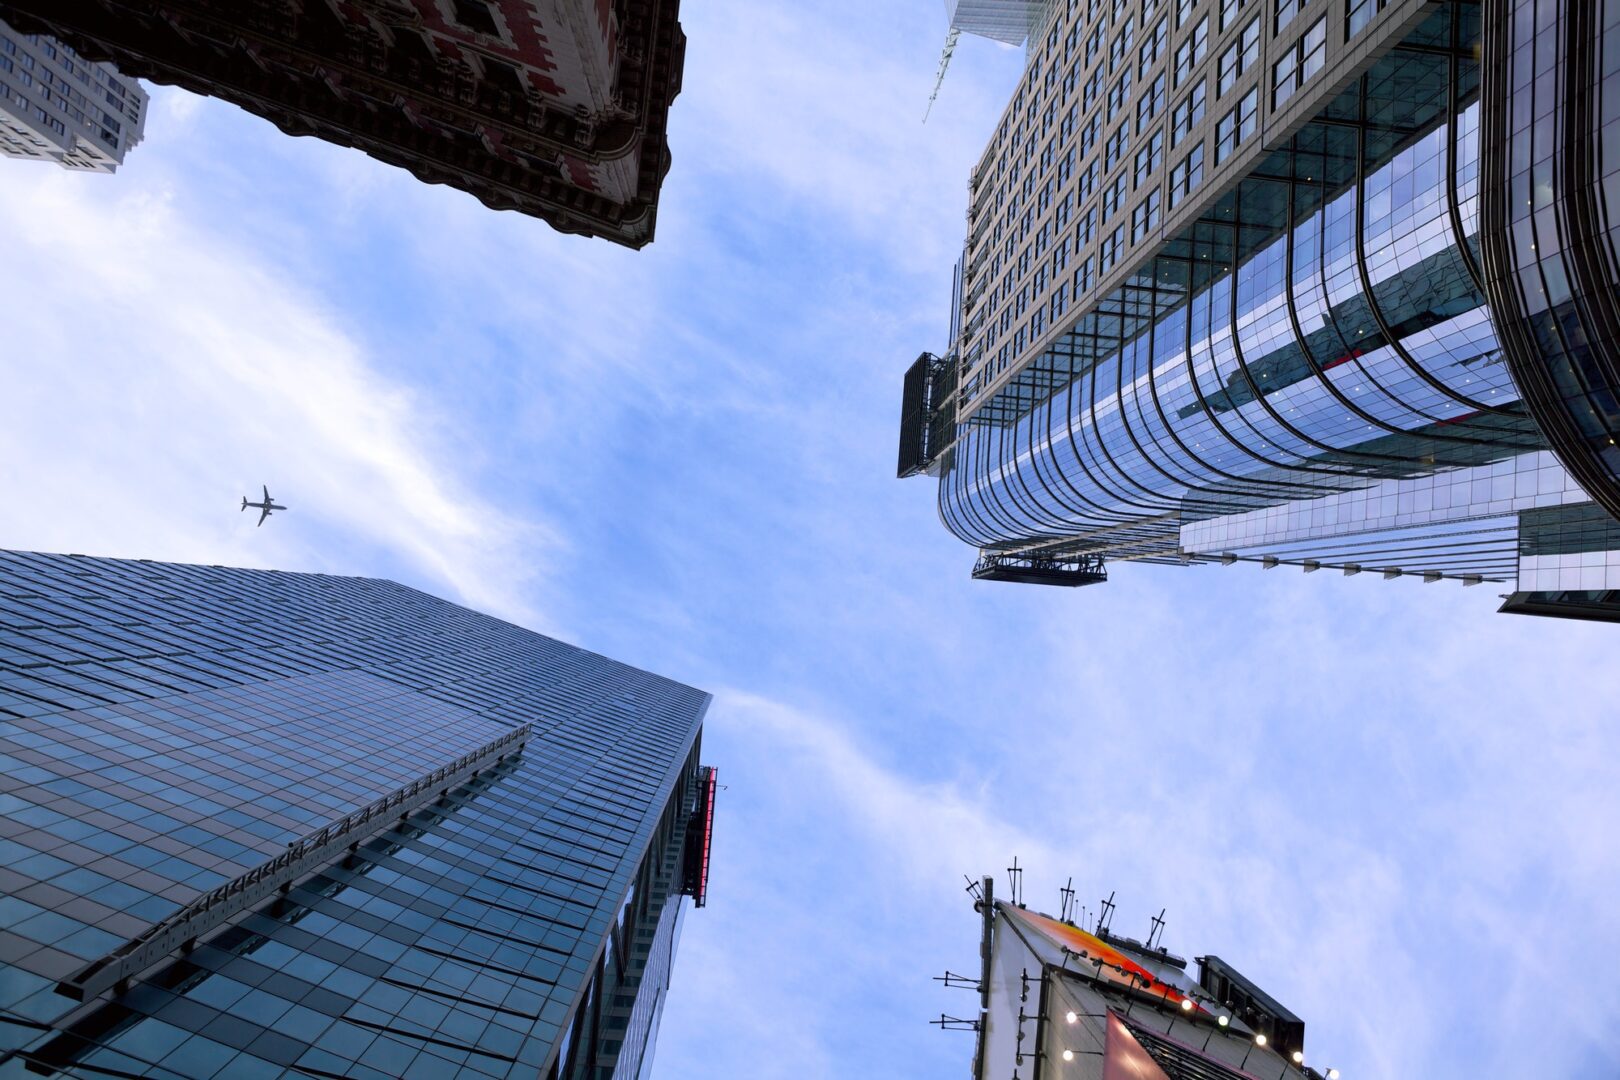 A view of some buildings from below looking up.